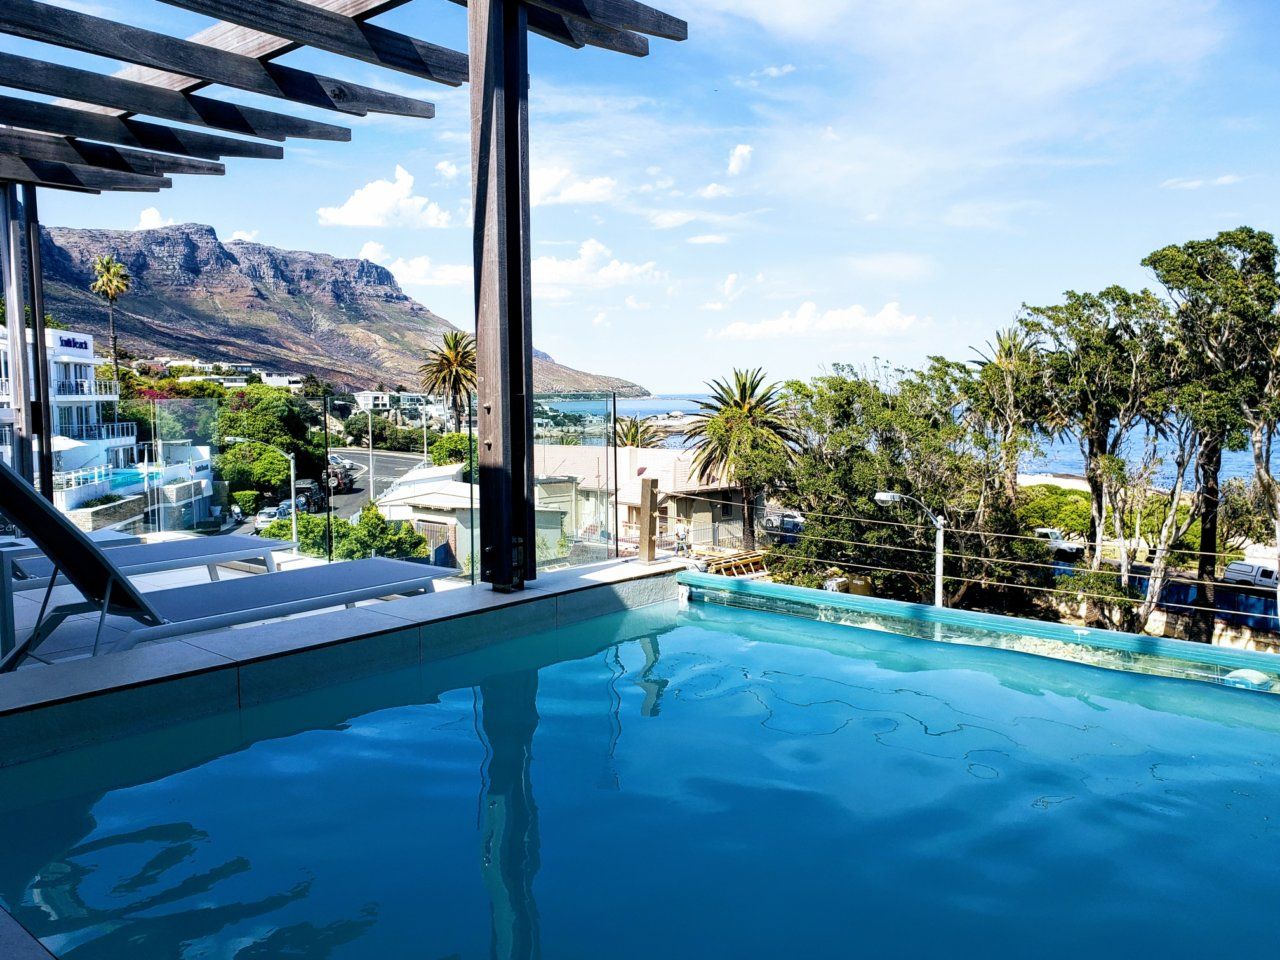 Photo 12 of Penthouse 3 accommodation in Camps Bay, Cape Town with 3 bedrooms and 3 bathrooms